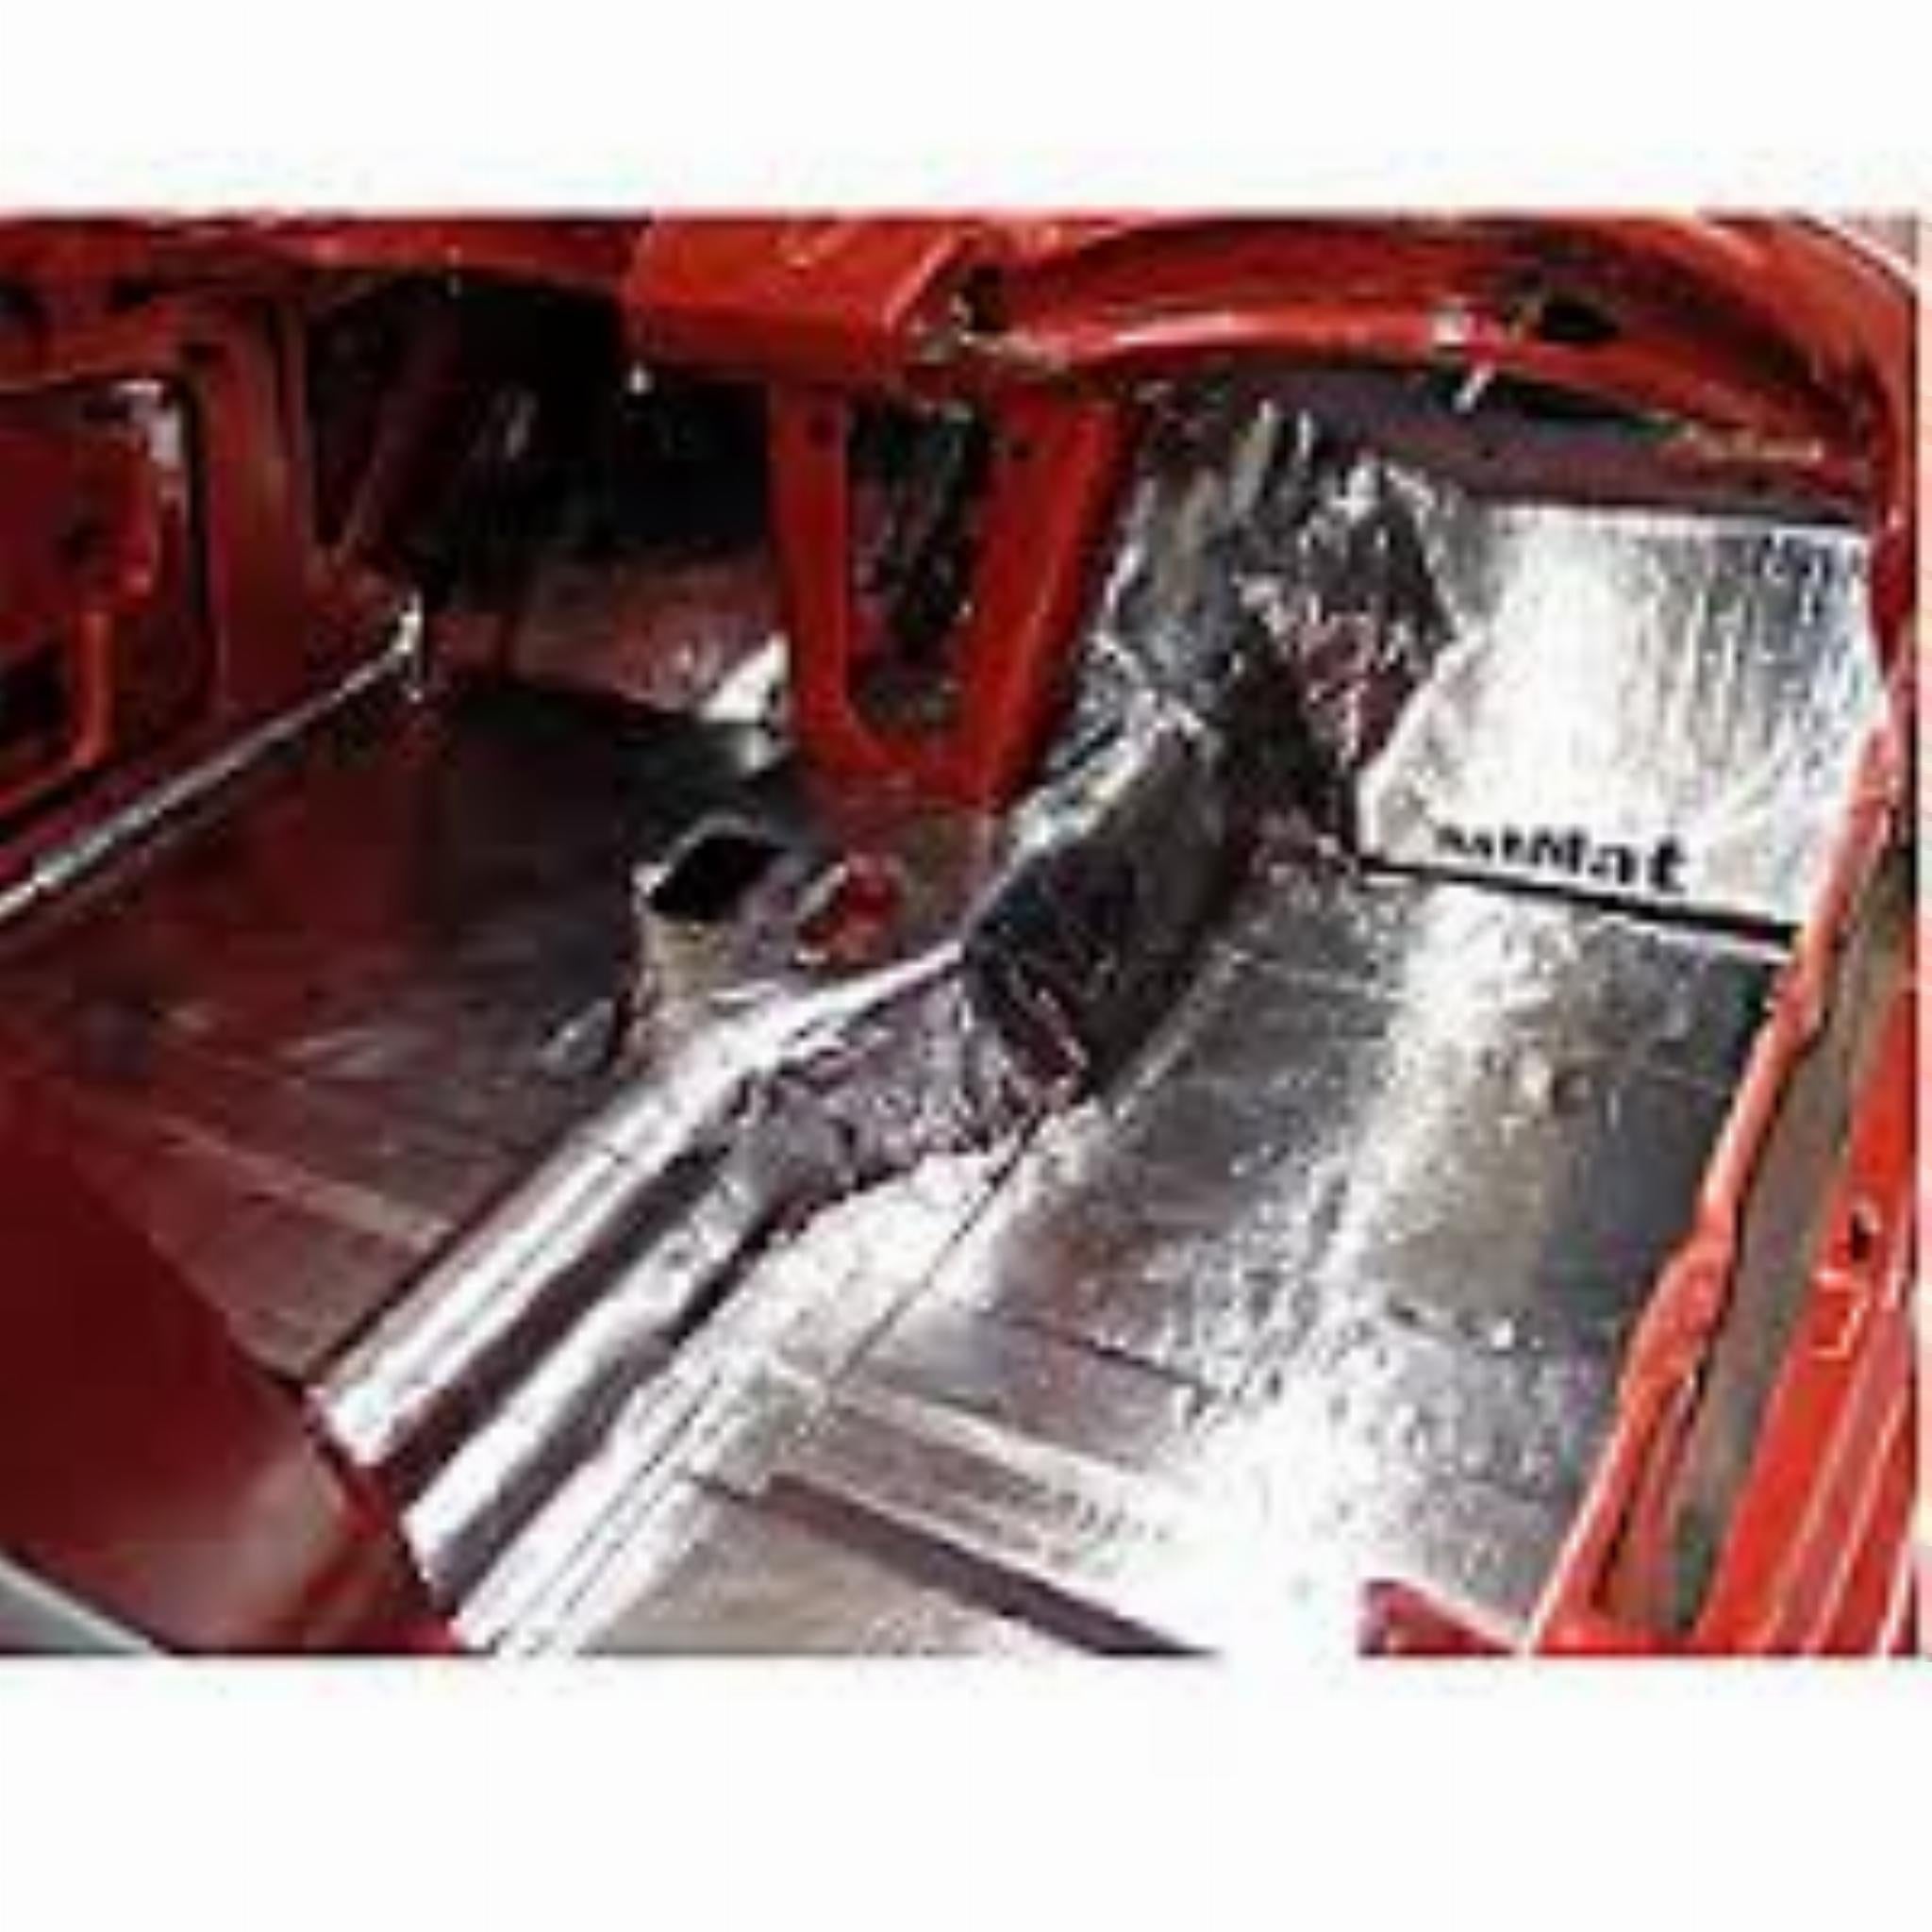 Complete Vehicle Insulation Kit for an International Scout.